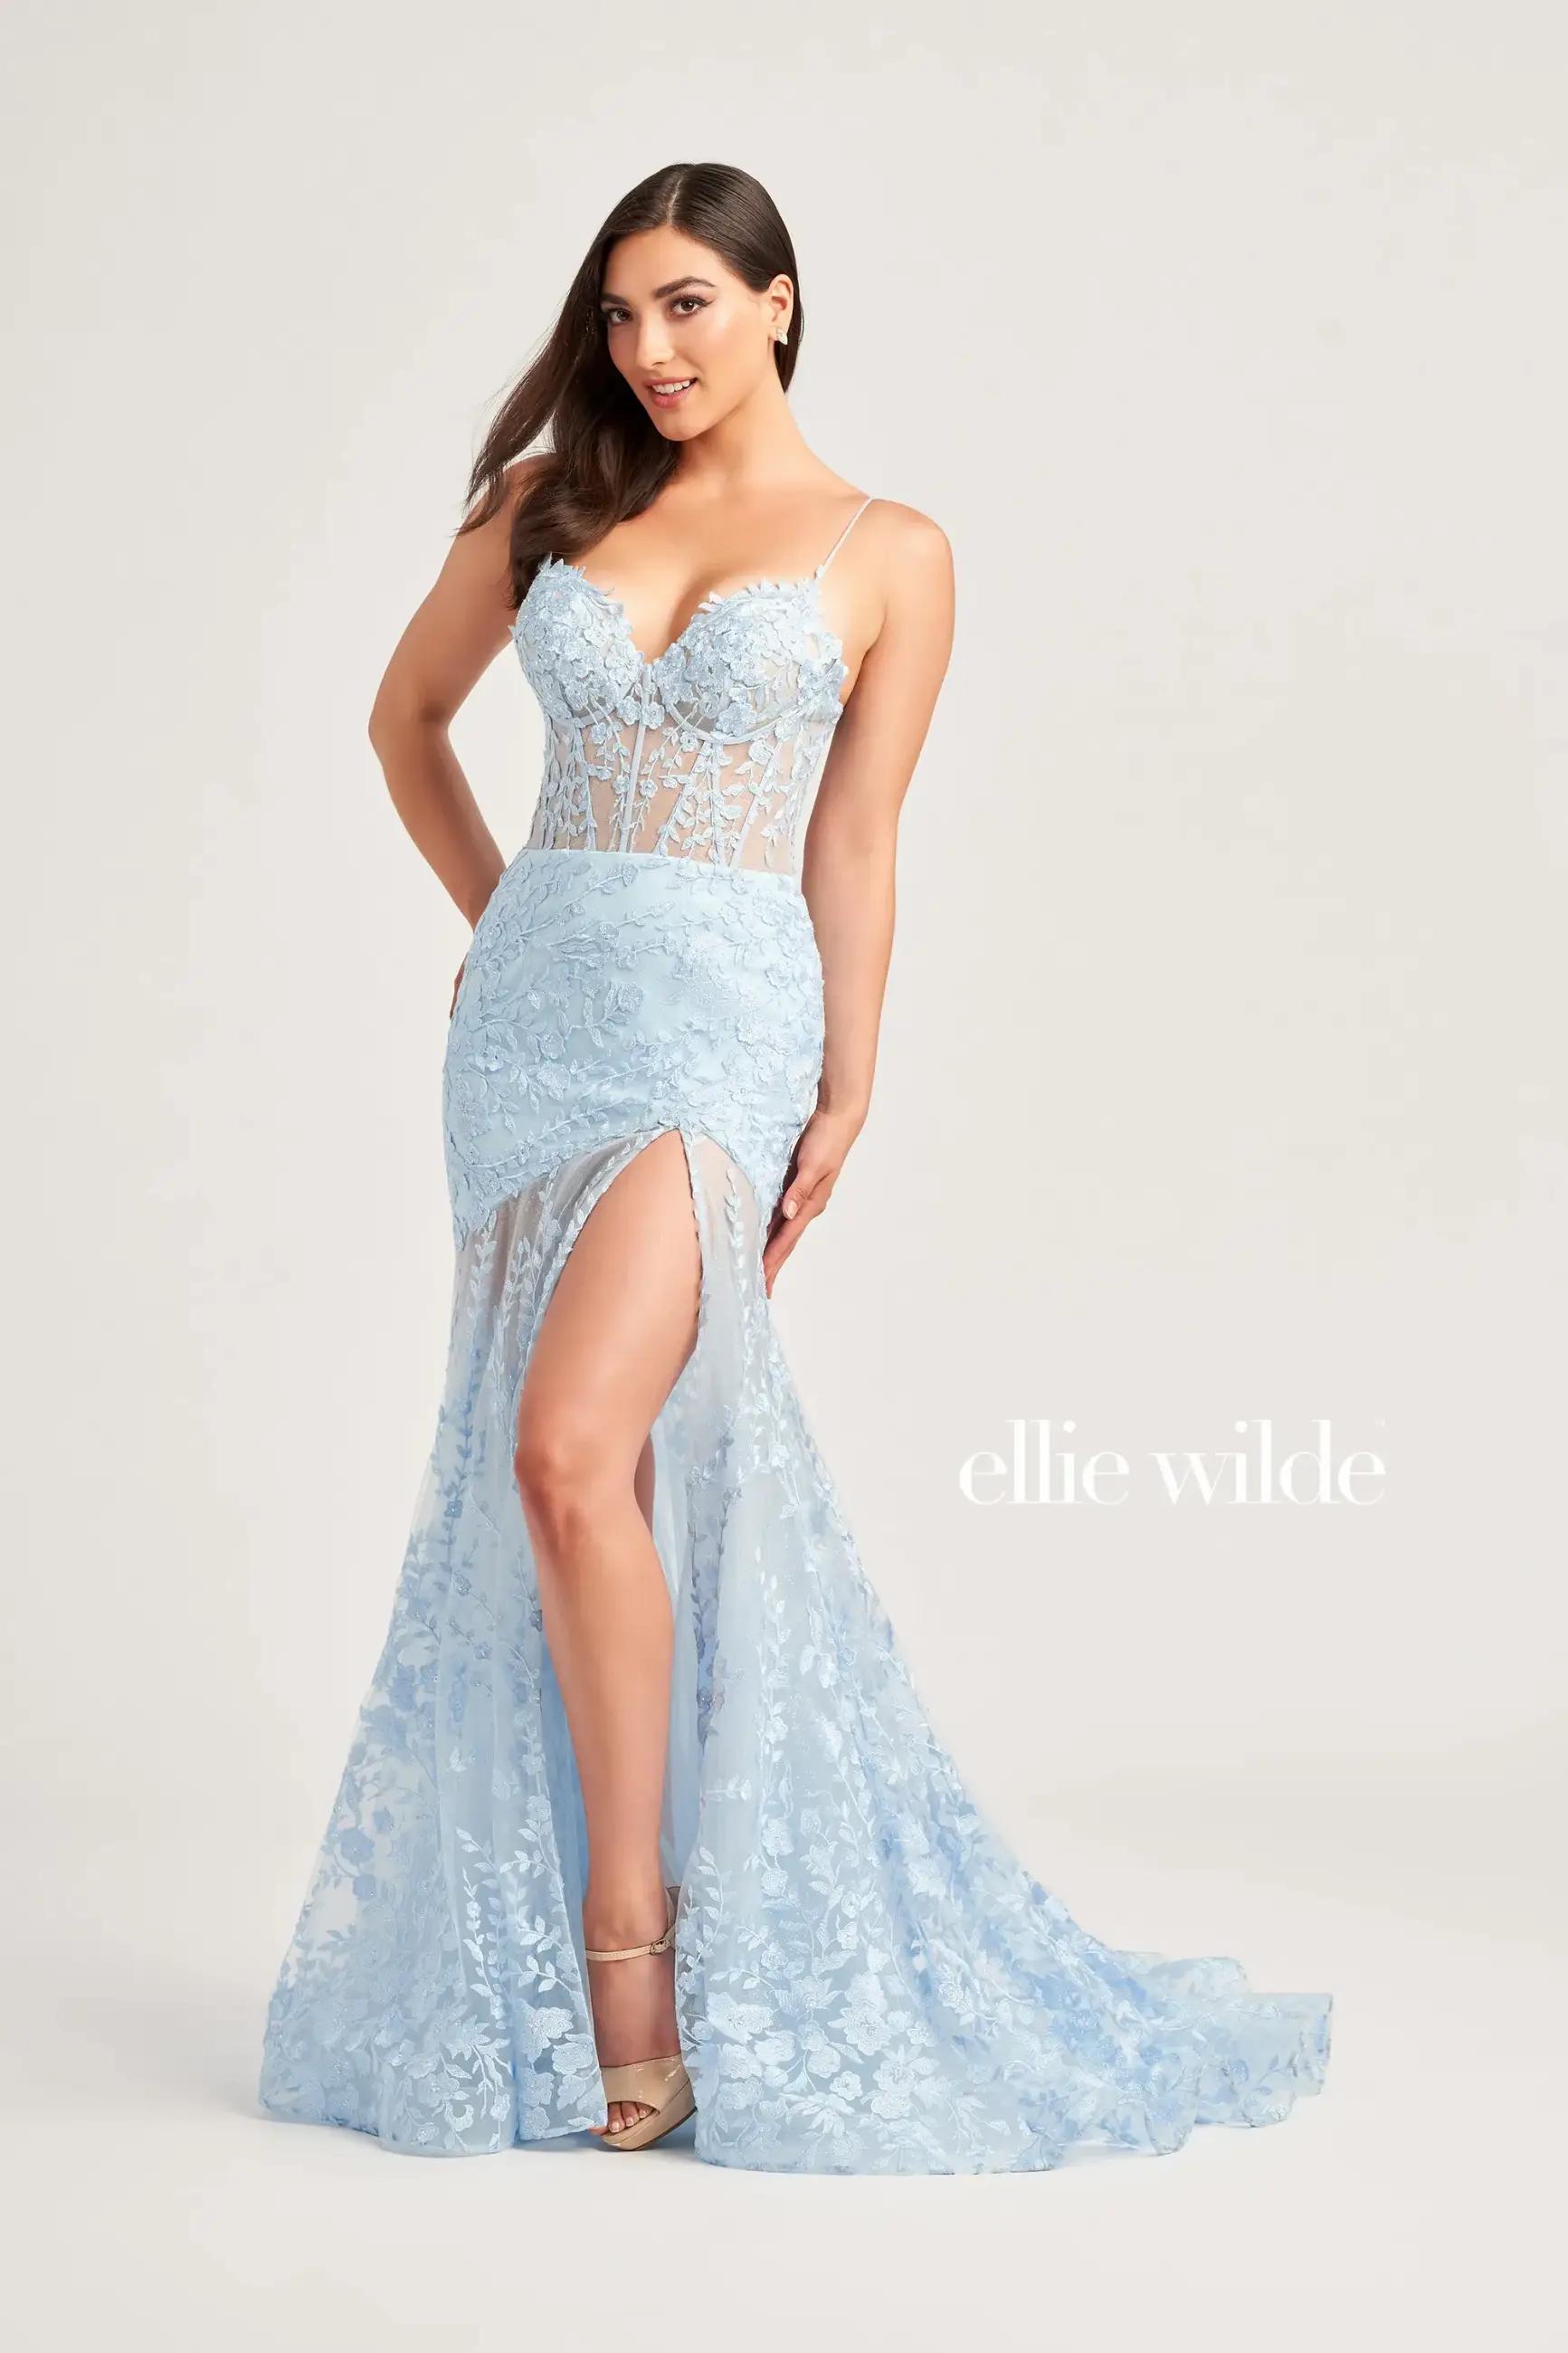 Prom Panic? Relax! Our Last-Minute Dress Selection Will Save the Day! Image